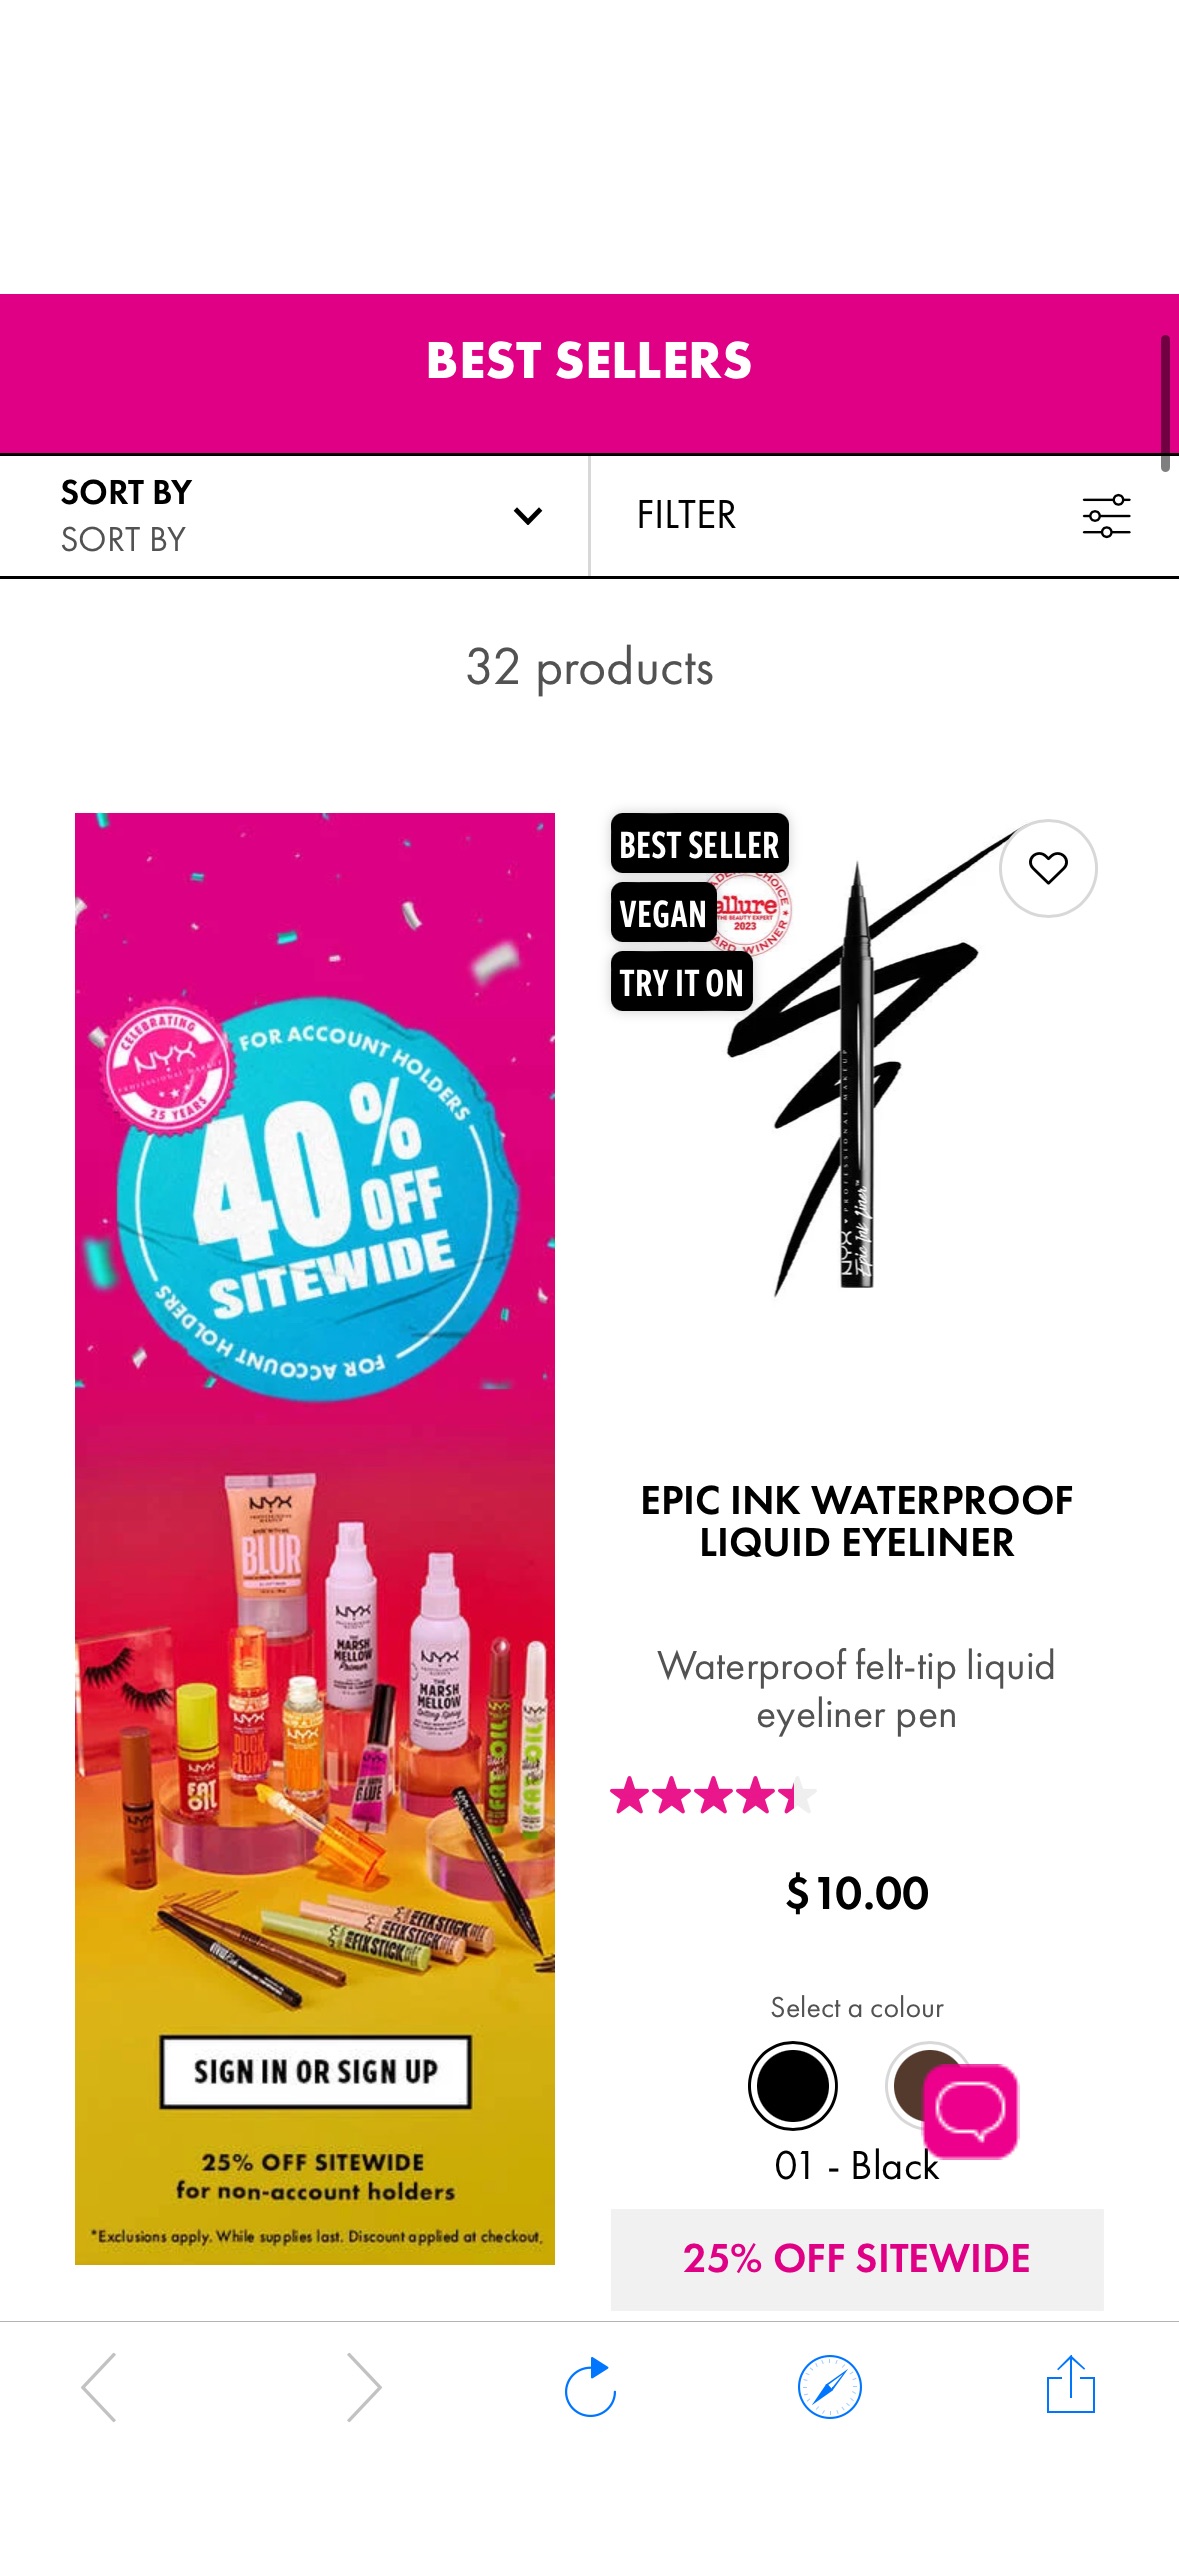 NYX Birthday Sale! 40% Off Sitewide